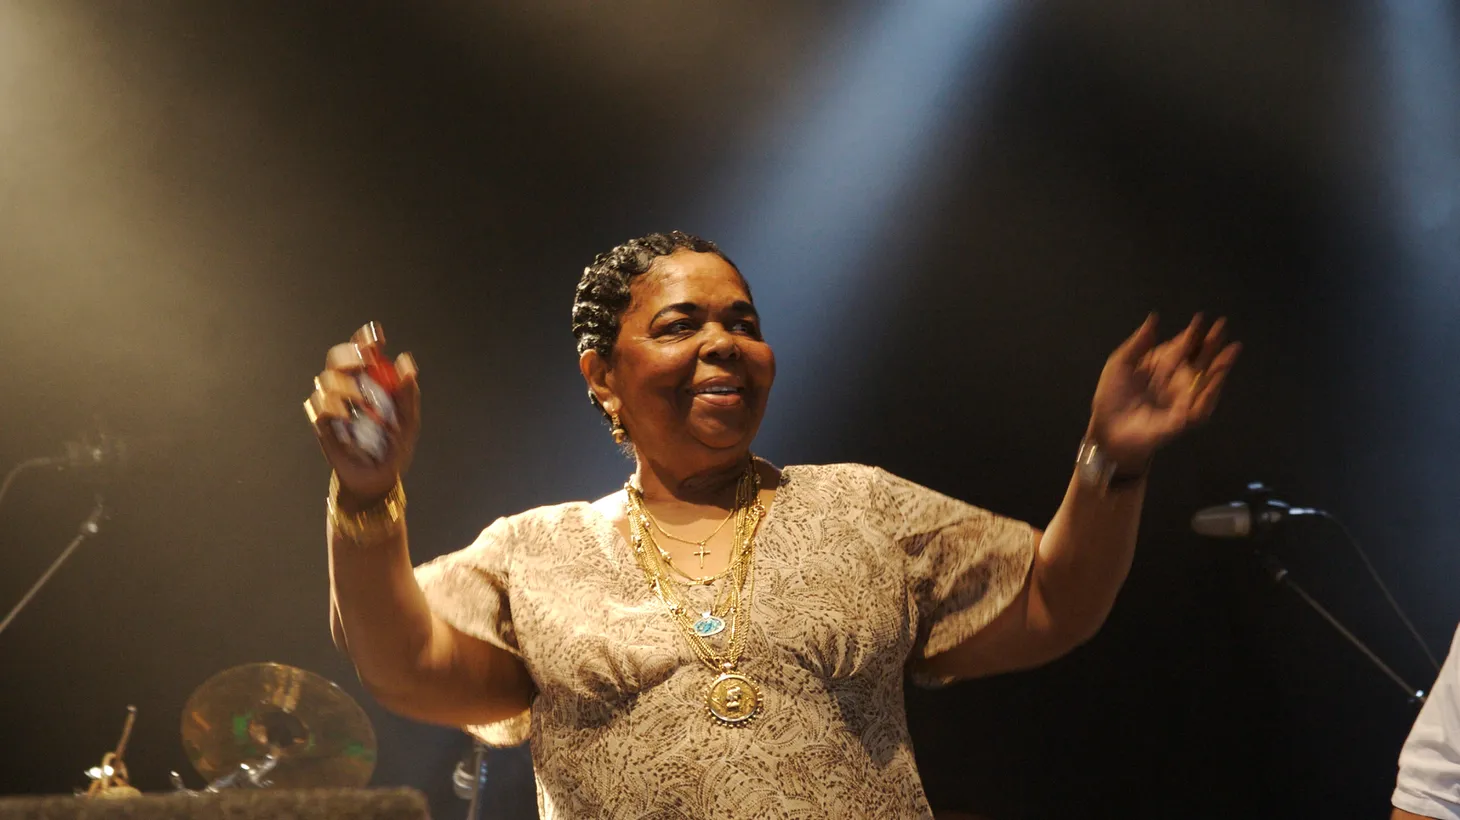 The most famous diva from Cape Verde, Cesaria Evora, visits our studios for a live performance.